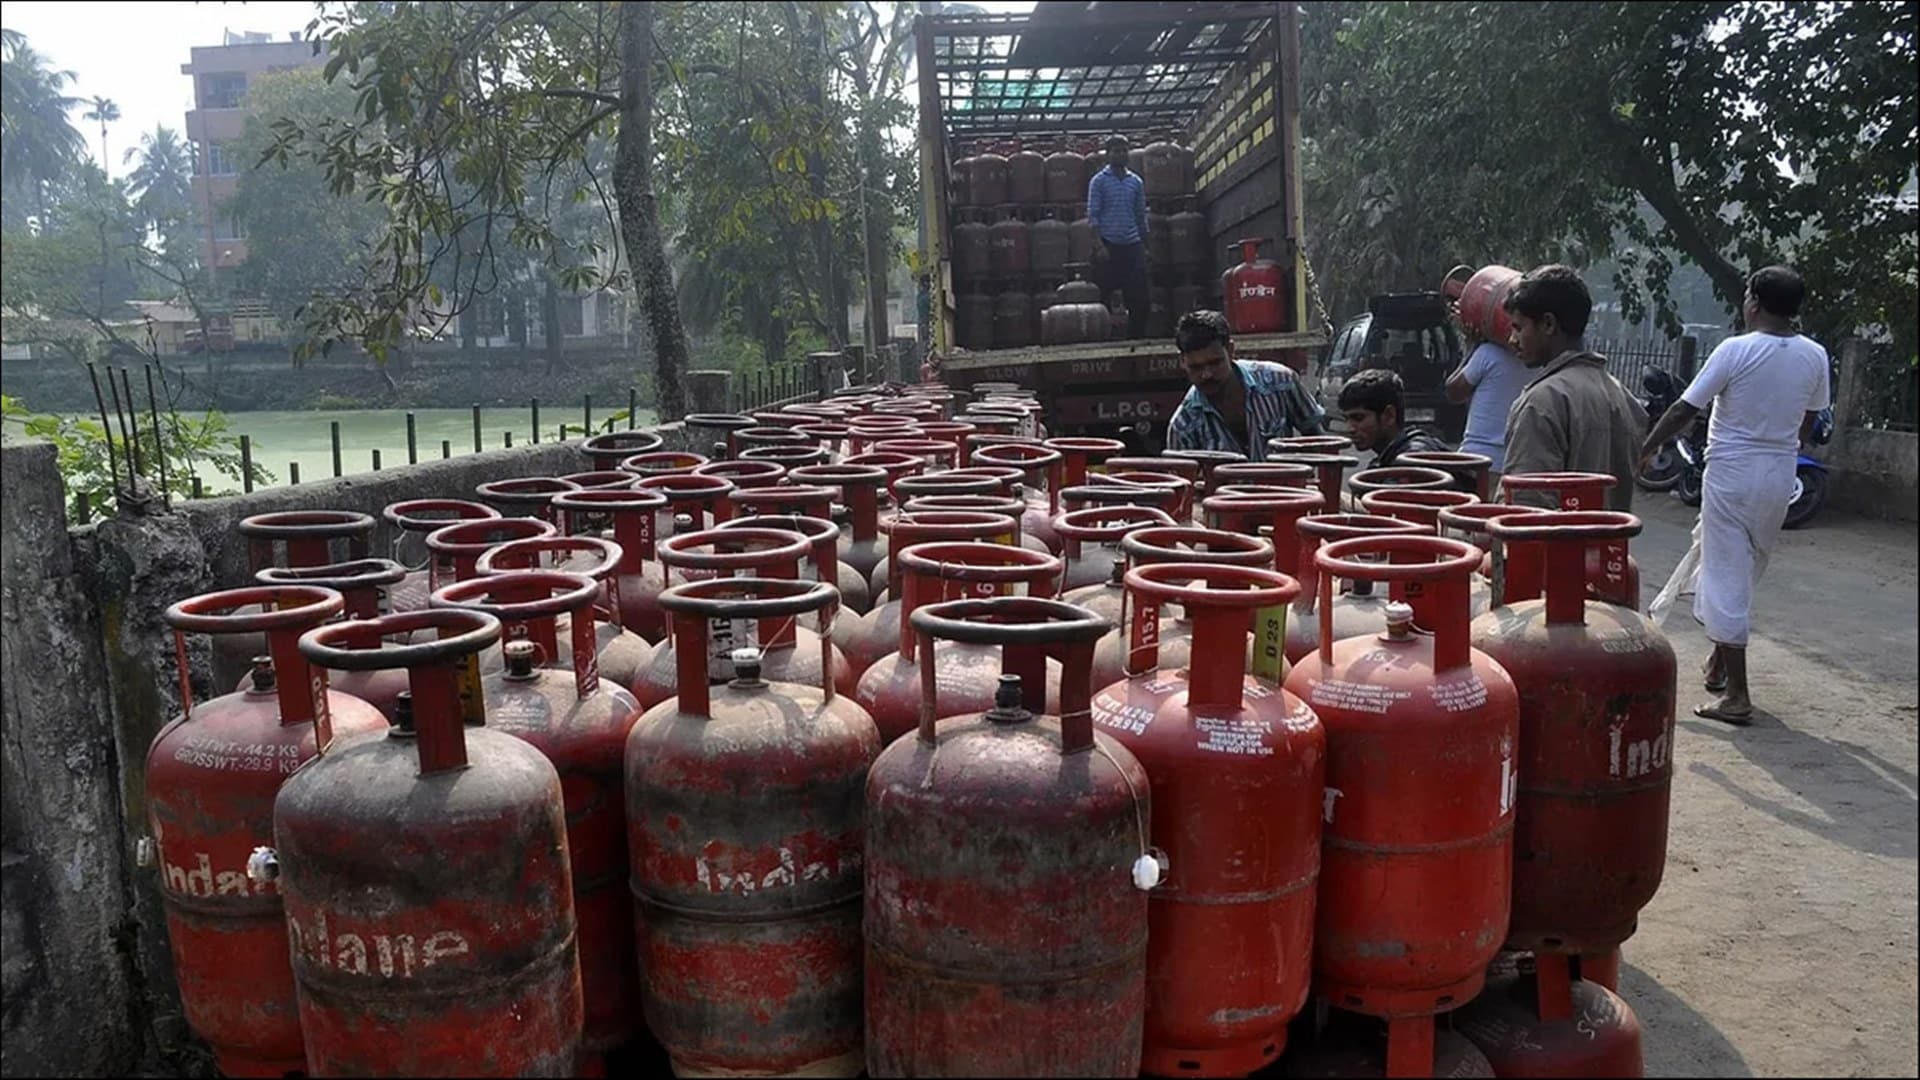 LPG Price Hike! Commercial cooking gas cylinders price up by Rs 266